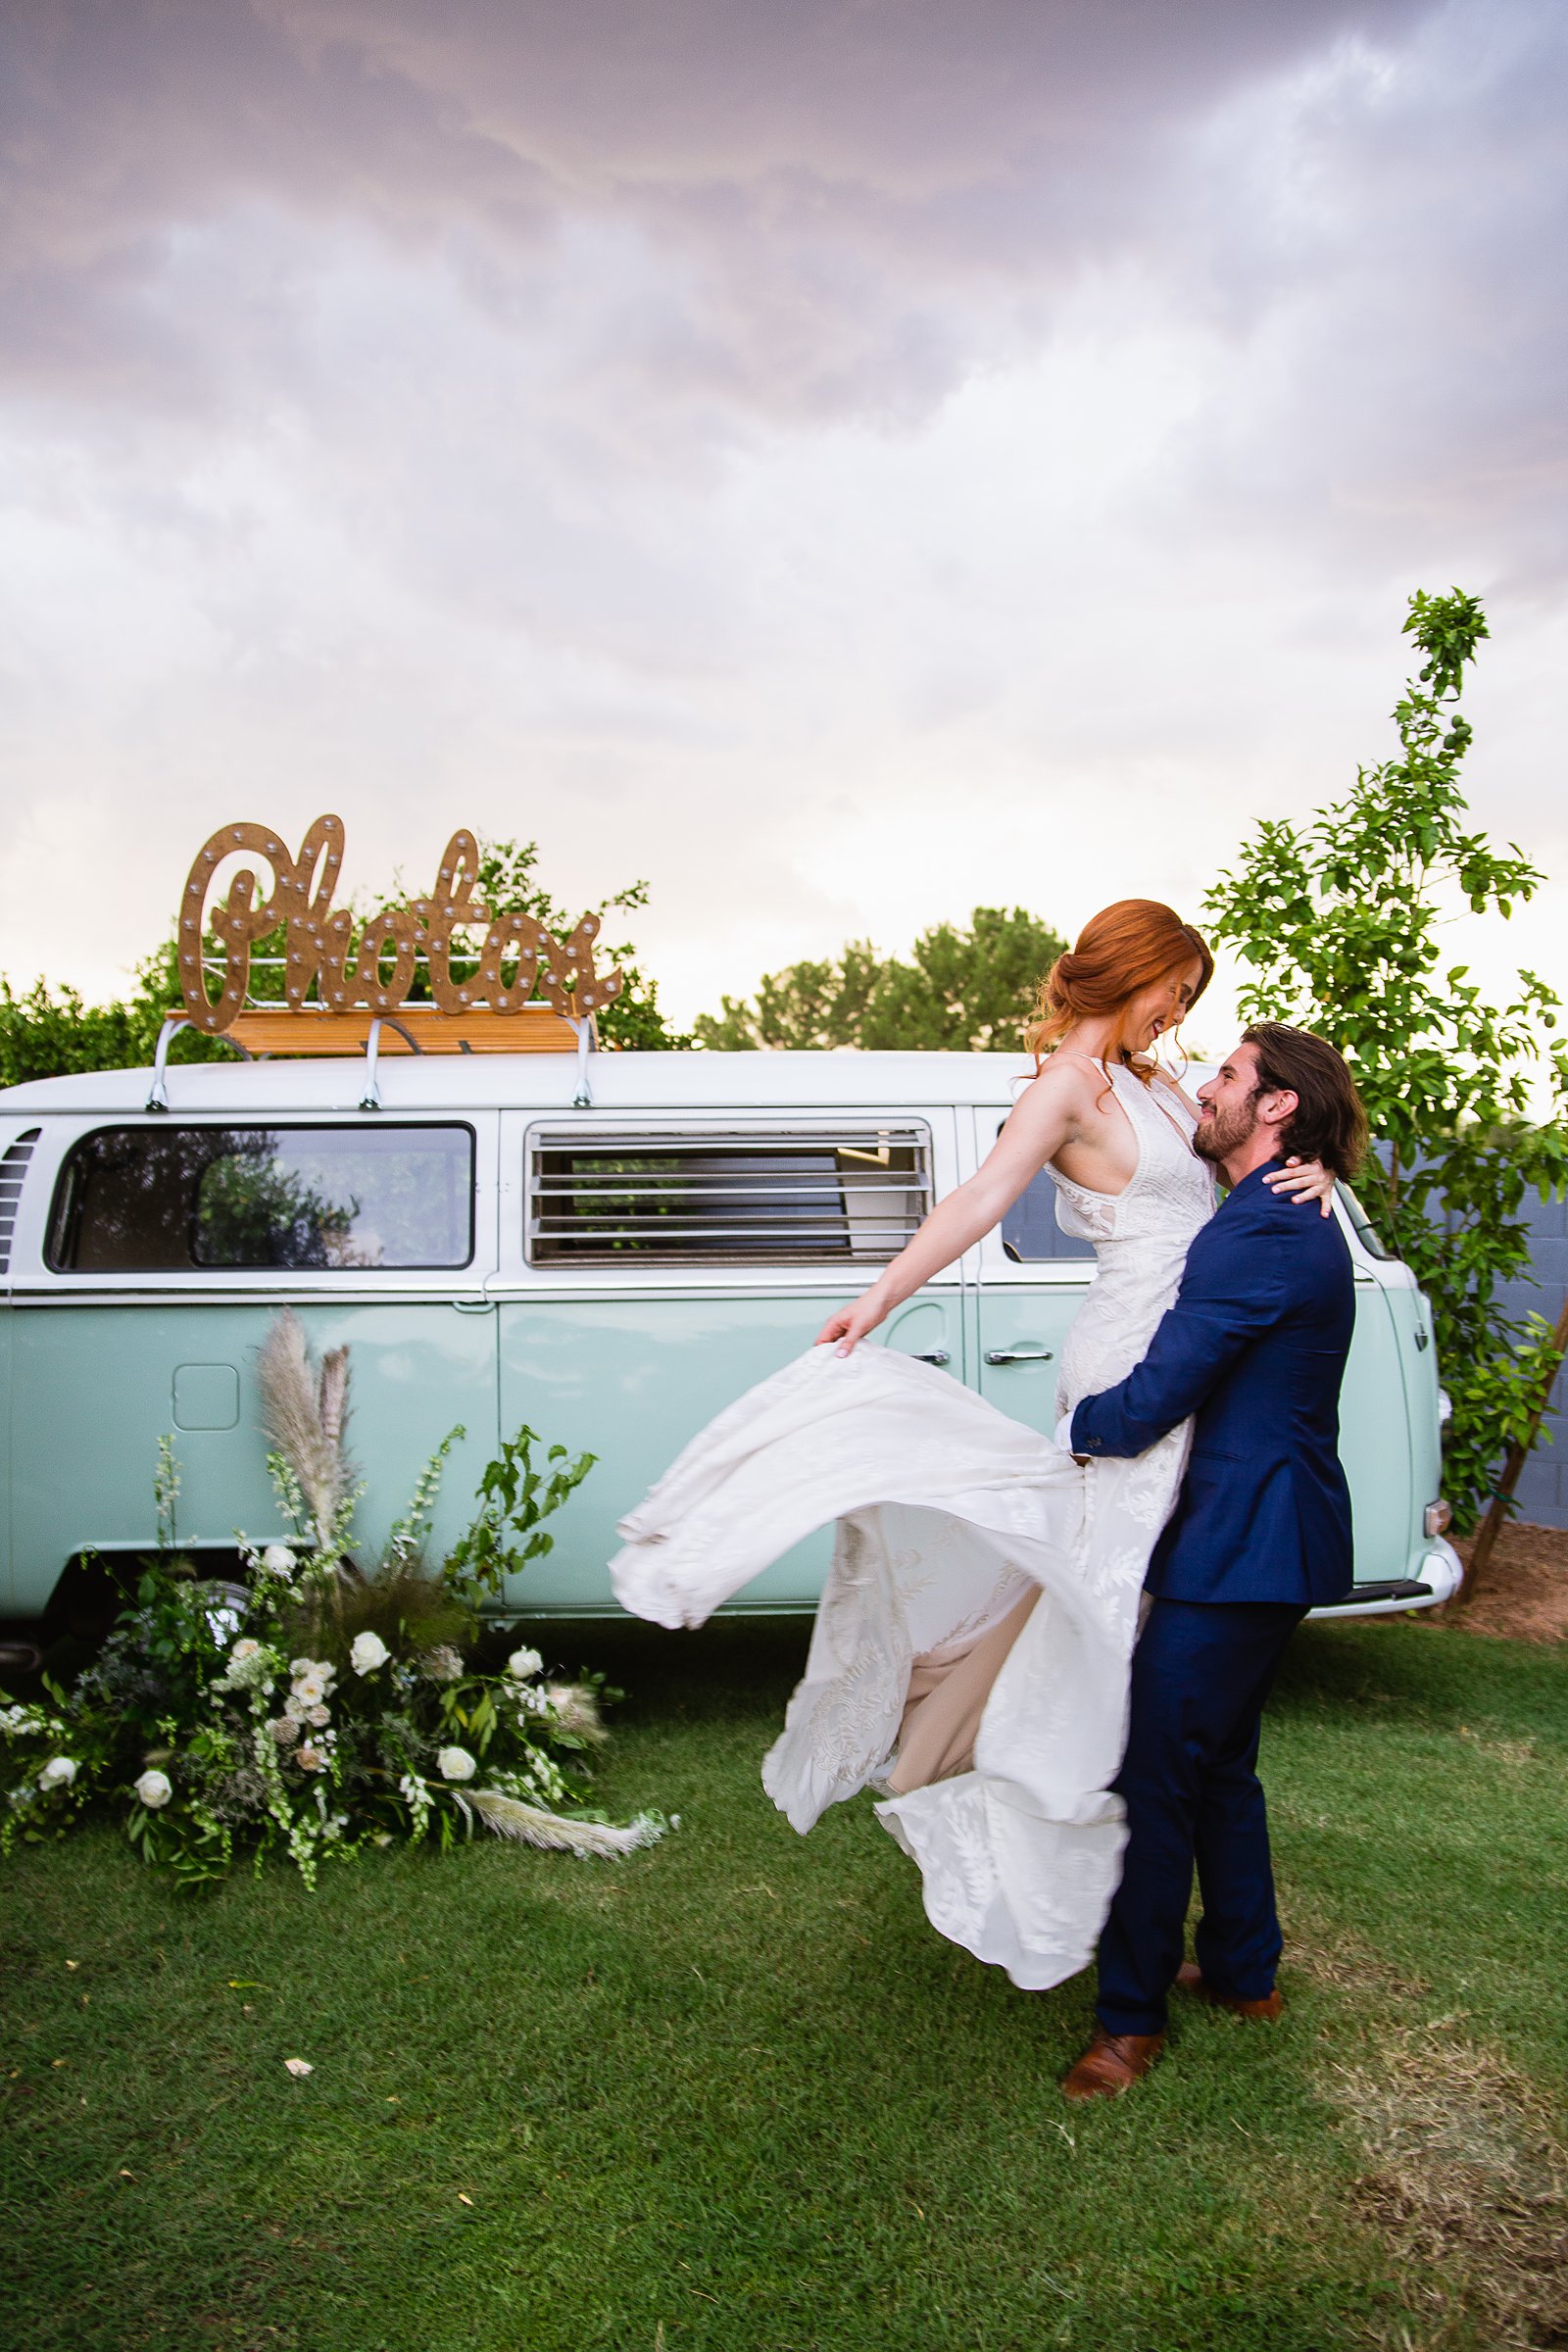 Bride and groom together with VW Bus photo booth at Gather Estate wedding by Arizona wedding photographers PMA Photography.